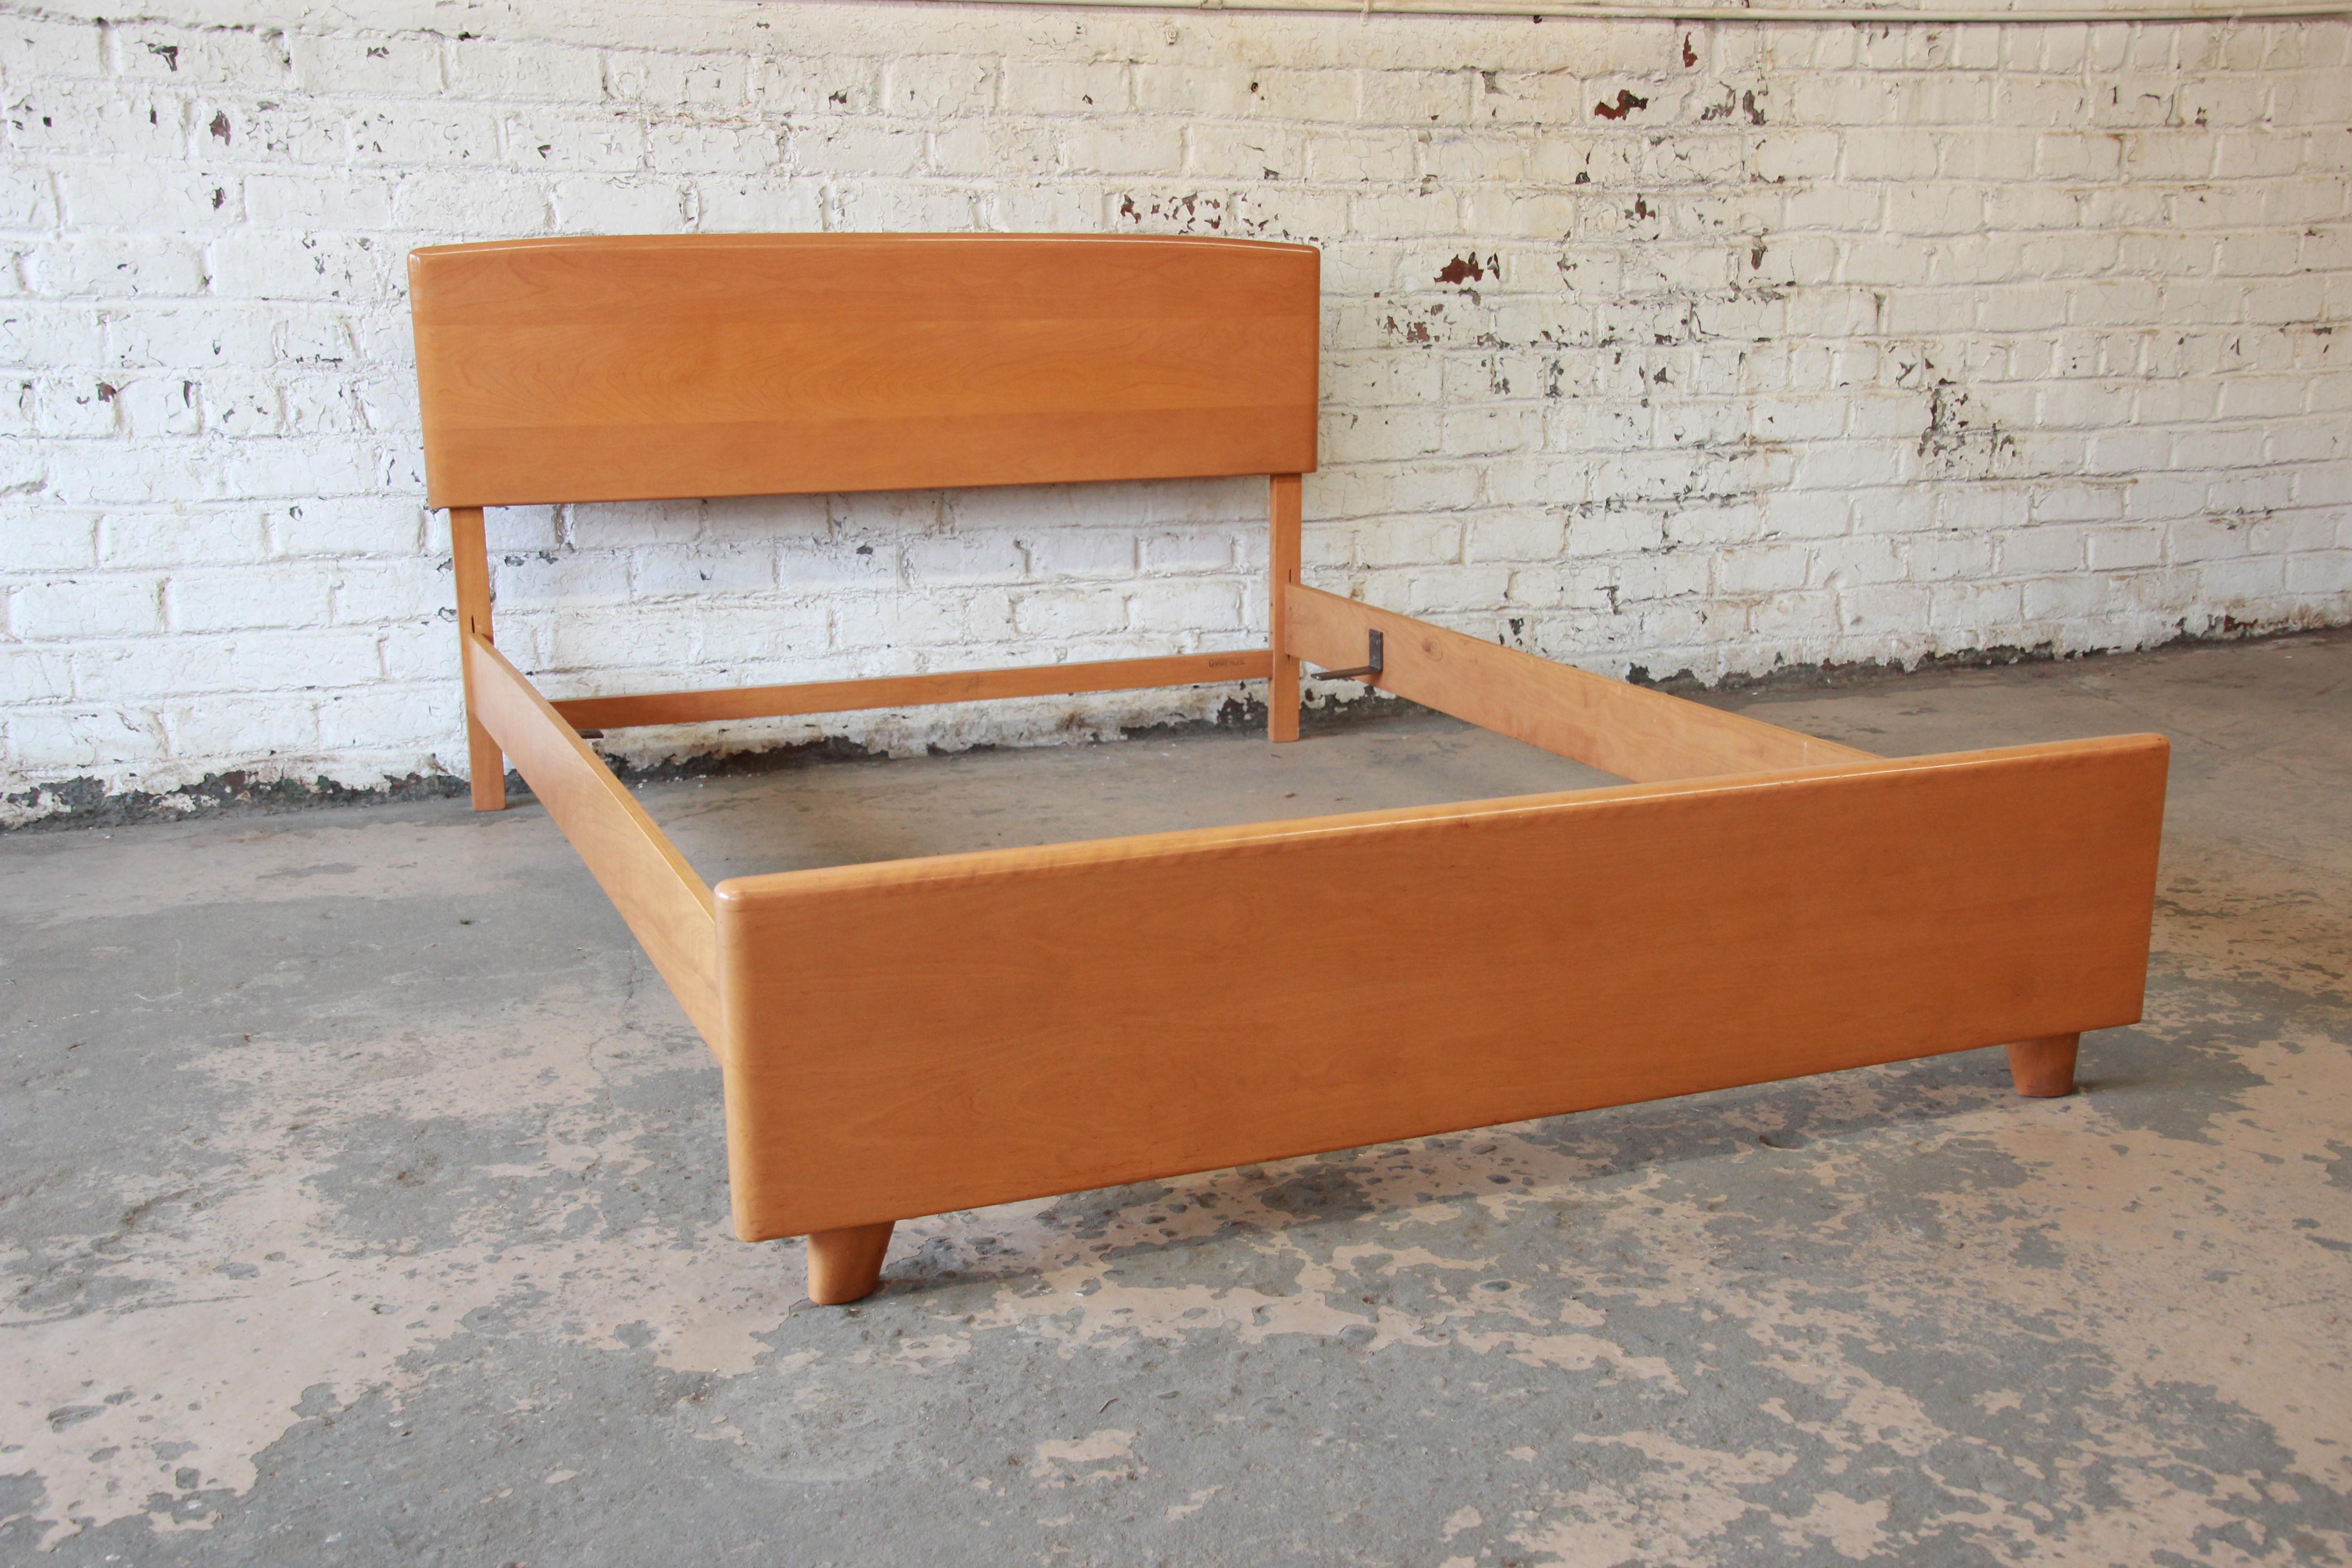 A very nice Mid-Century Modern full size bed by Heywood Wakefield. The bed features beautiful wood grain and solid birch construction. It is in the Classic 